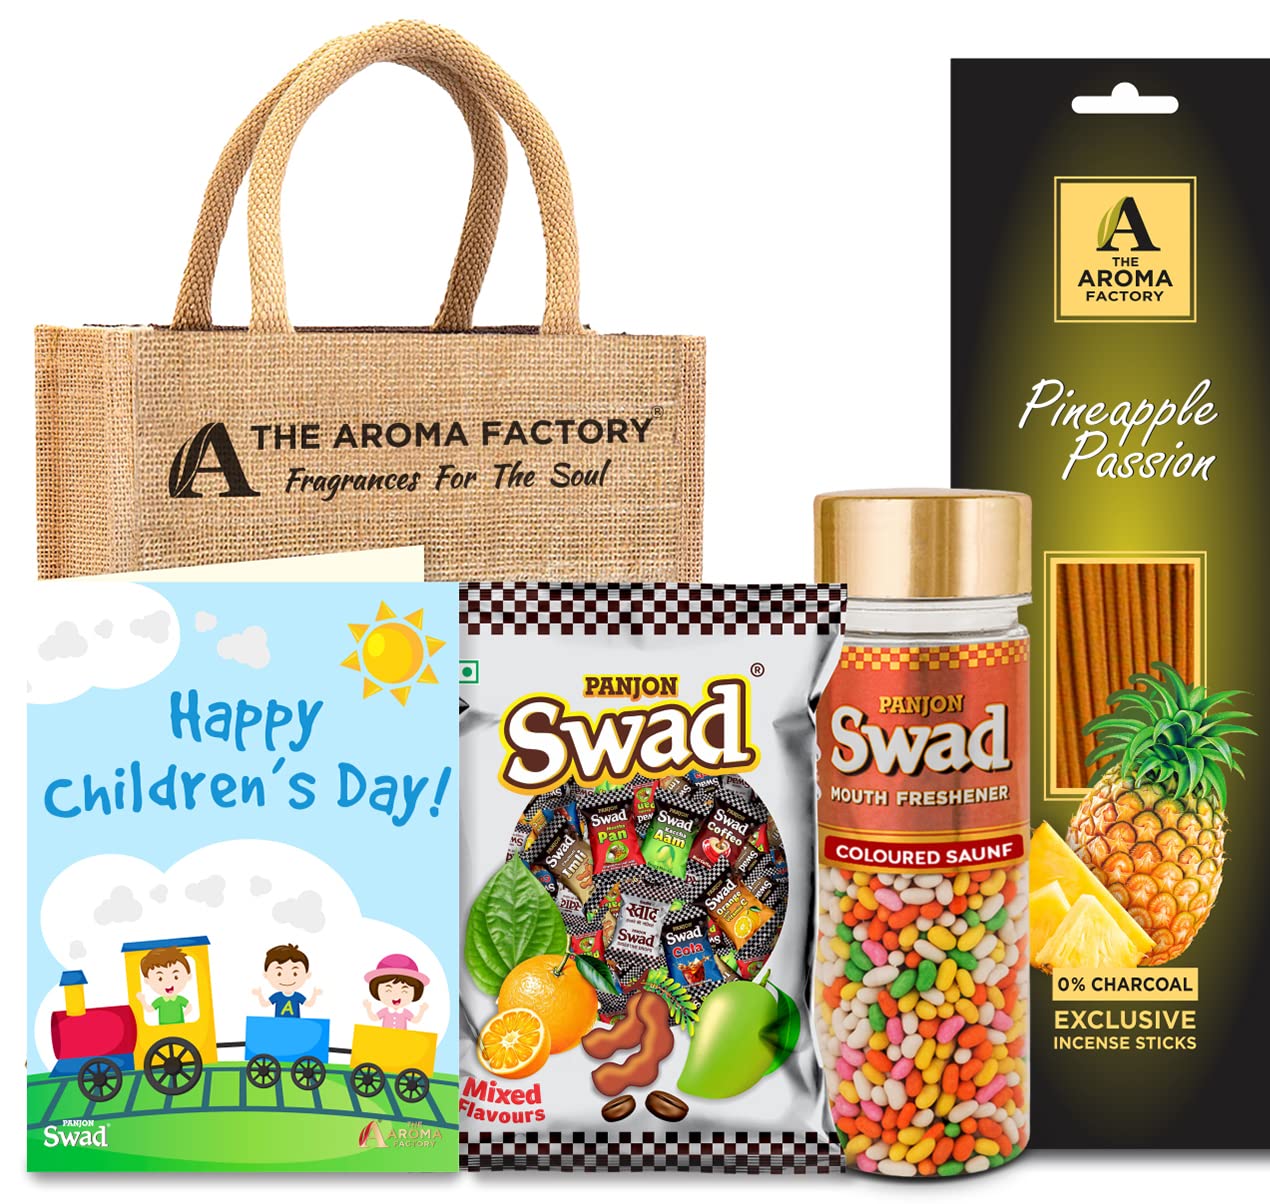 The Aroma Factory Happy Children's Day Gift Hamper Set (Swad Mix 25 Candy, Incense Pineapple 30 Sticks Agarbatti Packet, Swad Coloured Saunf Bottle, Greeting Card, Jute Bag) Gift Item